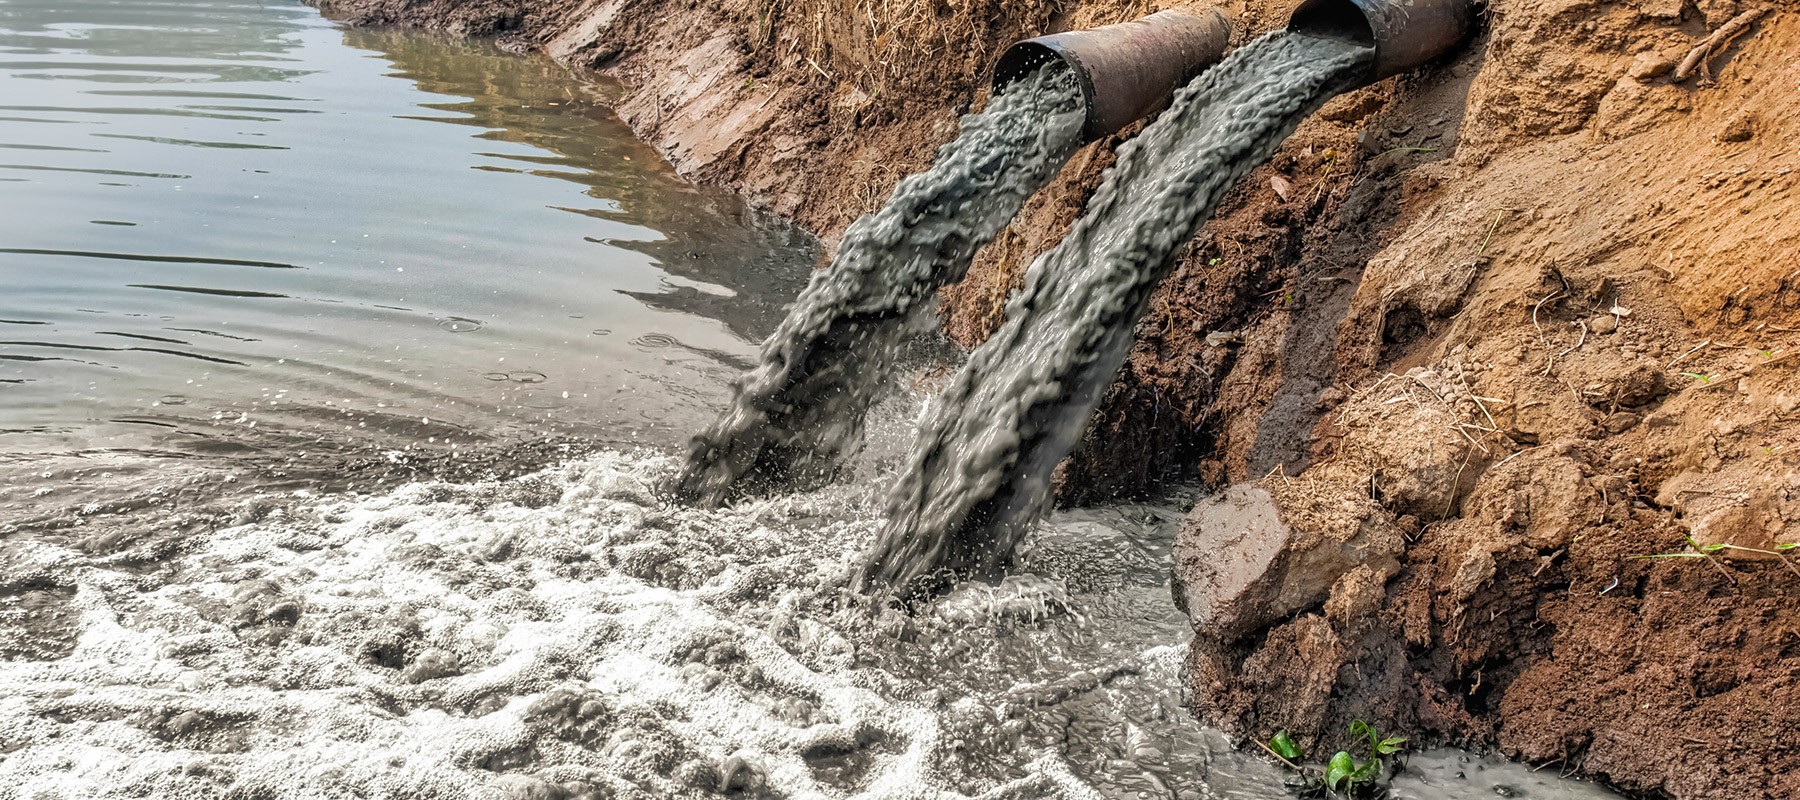 Pipes pumping polluted water into a river